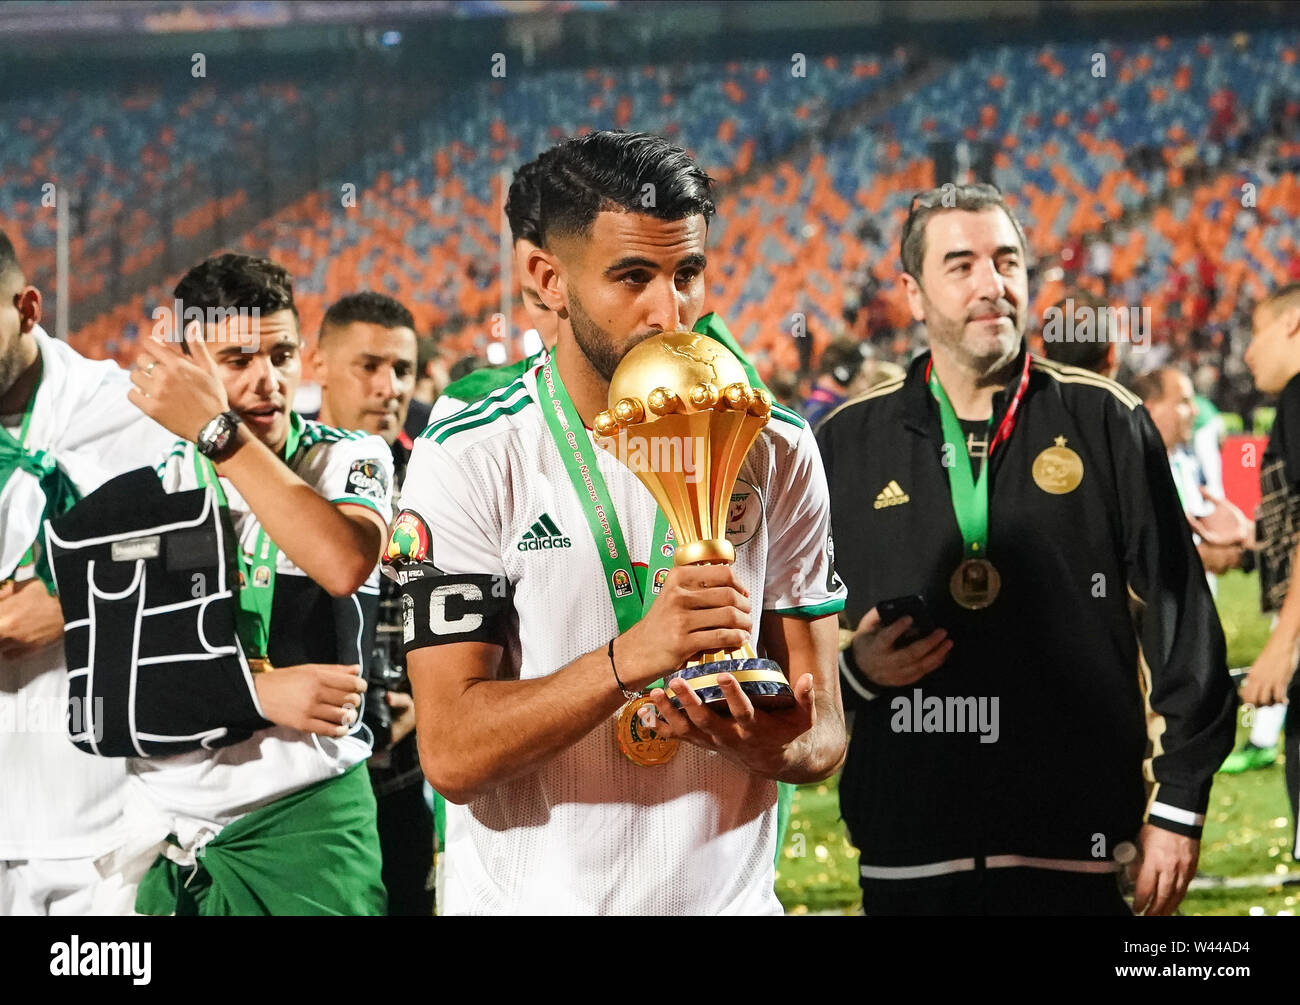 Cairo, Algeria, Egypt. 19th July, 2019. FRANCE OUT July 19, 2019: Riyad Karim Mahrez of Algeria with the trophy after the Final of 2019 African Cup of Nations match between Algeria and Senegal at the Cairo International Stadium in Cairo, Egypt. Ulrik Pedersen/CSM/Alamy Live News Stock Photo